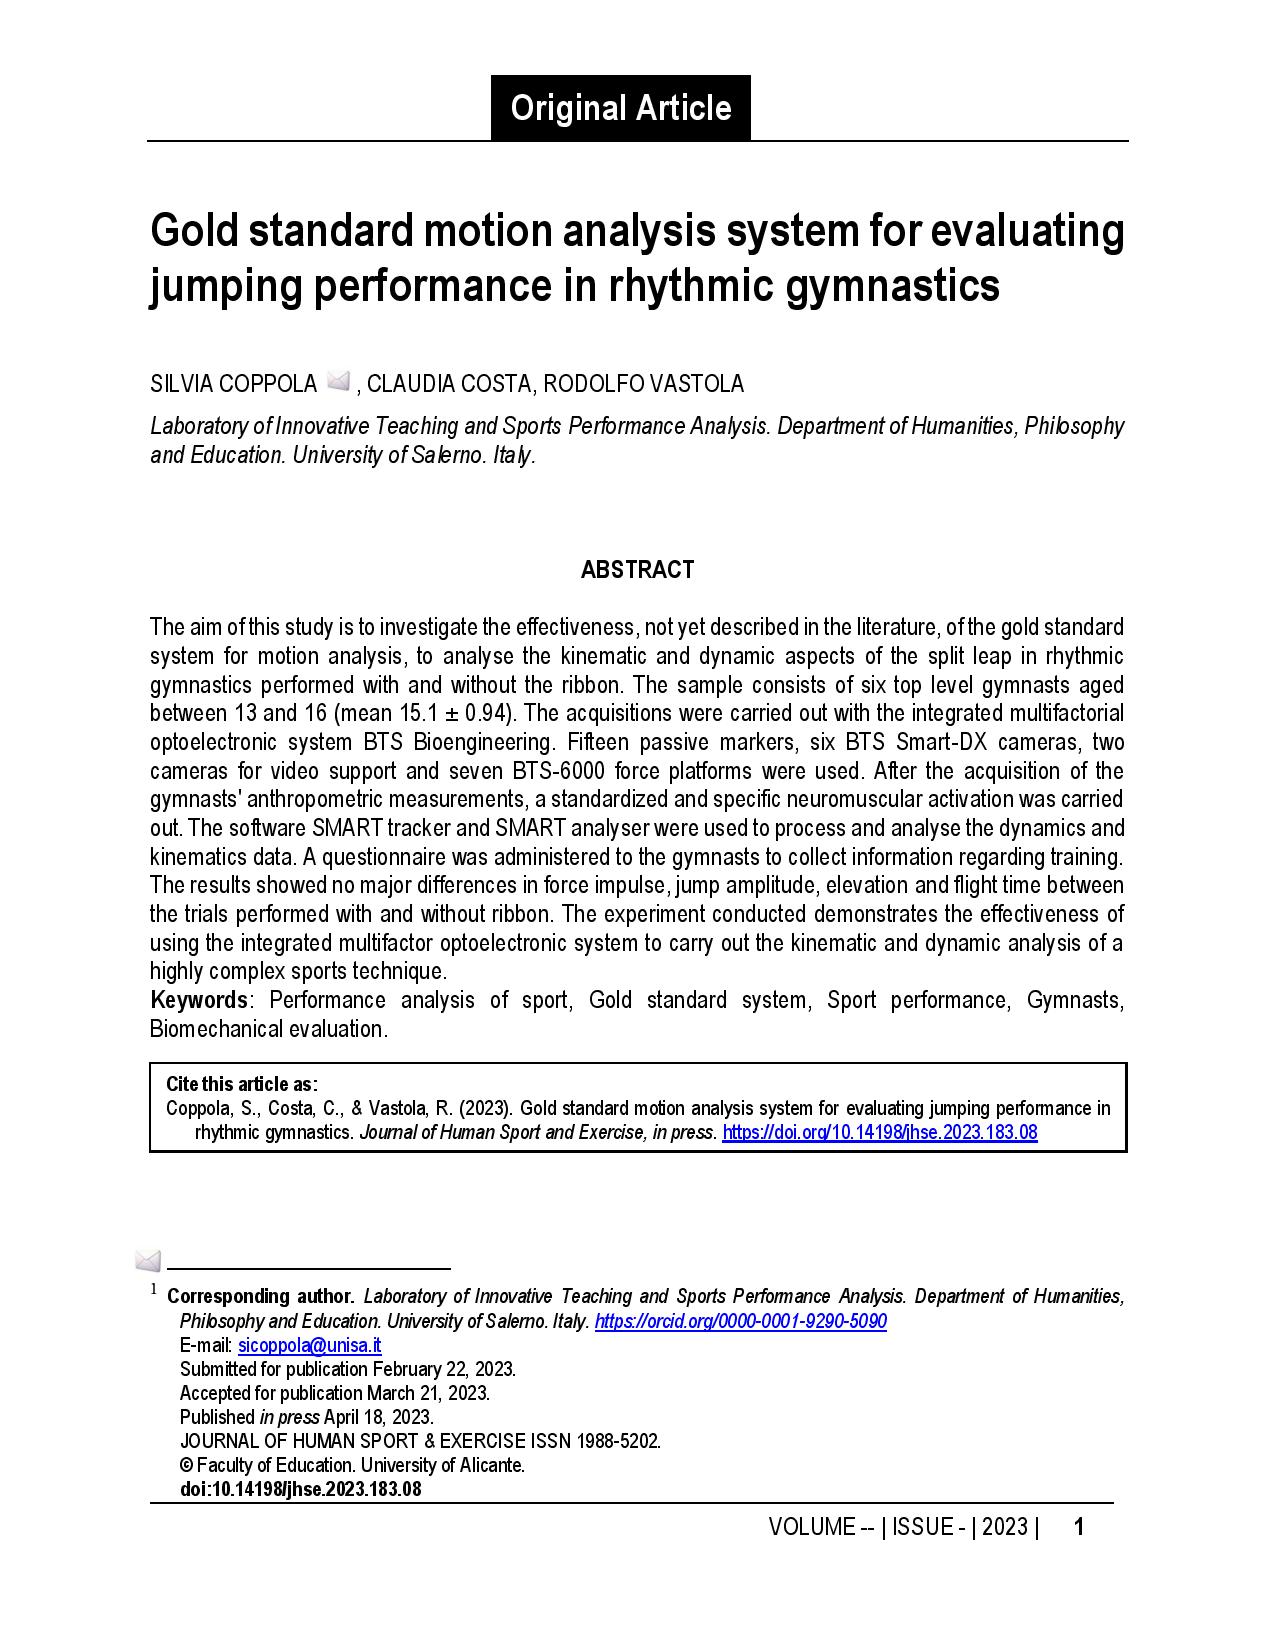 Gold standard motion analysis system for evaluating jumping performance in rhythmic gymnastics